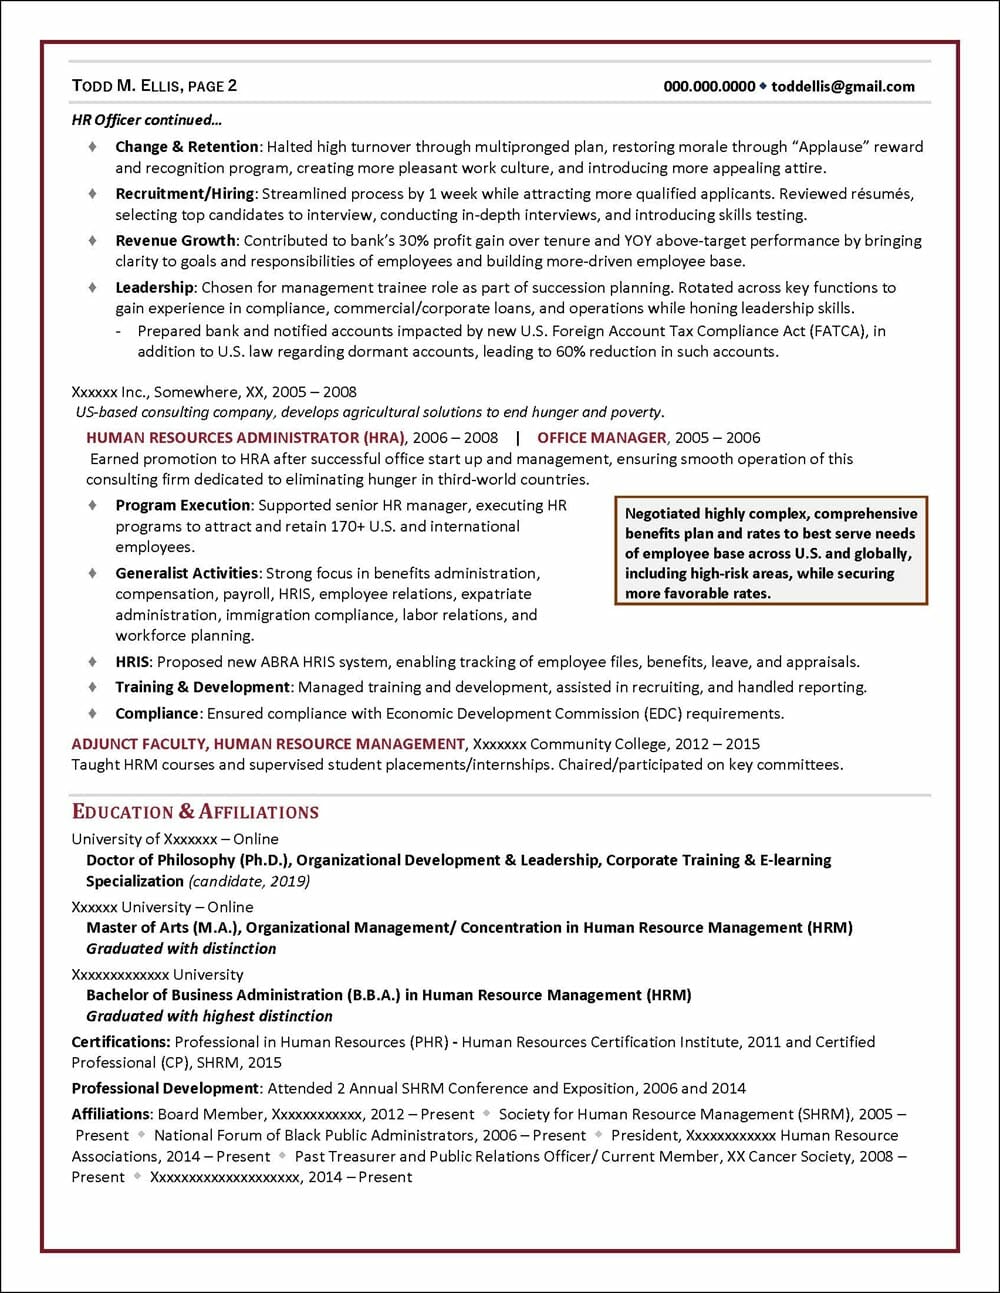 Senior Human Resources Manager Resume Page 2 1